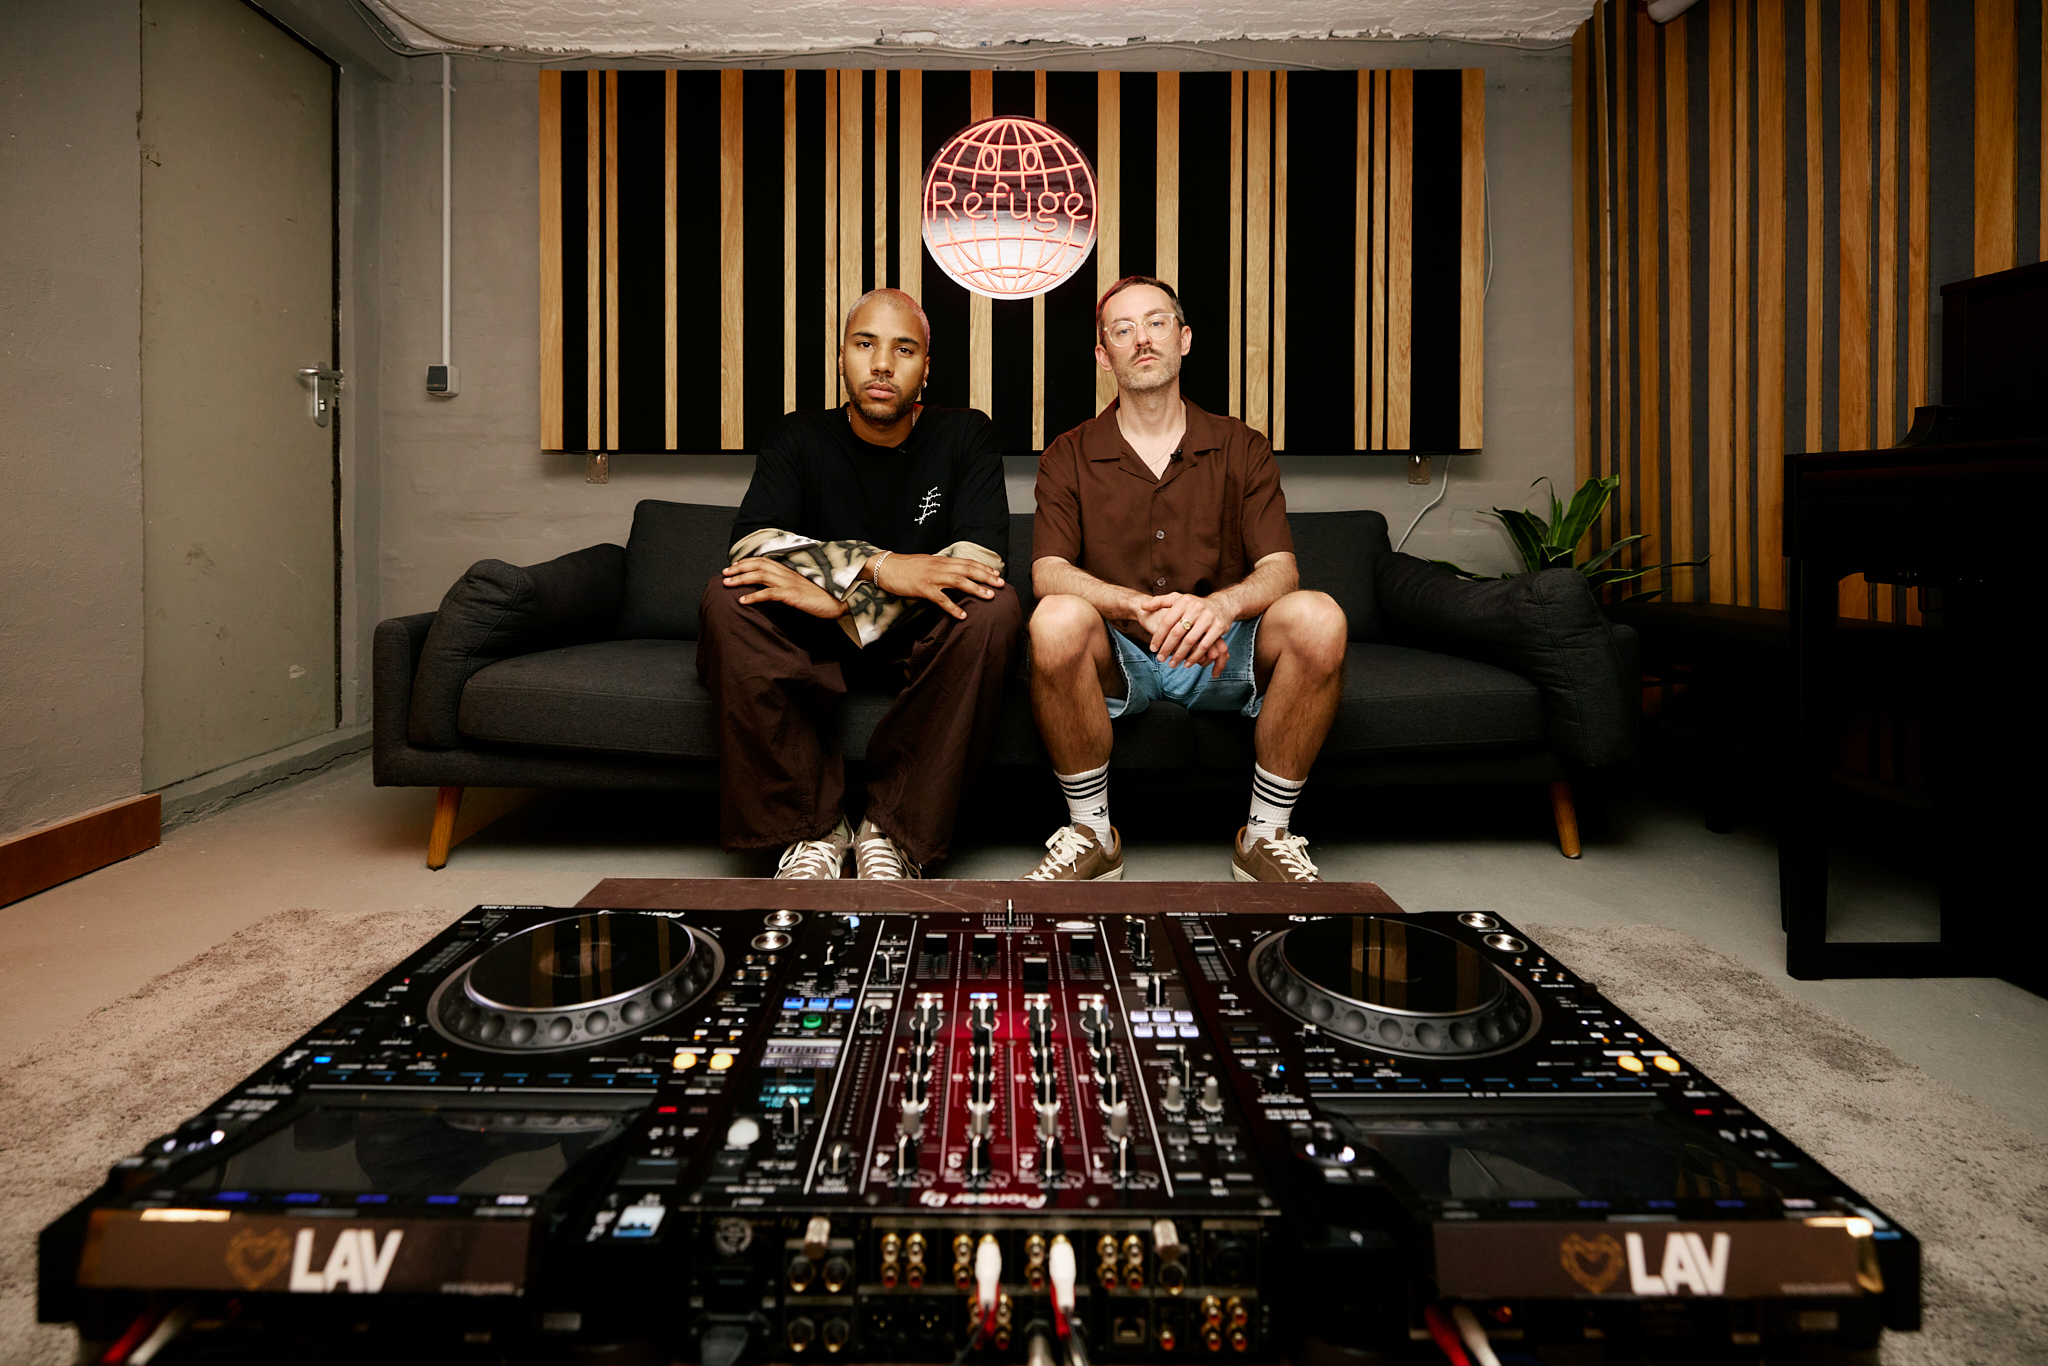 The founders of a radio station sitting on a sofa behind decks